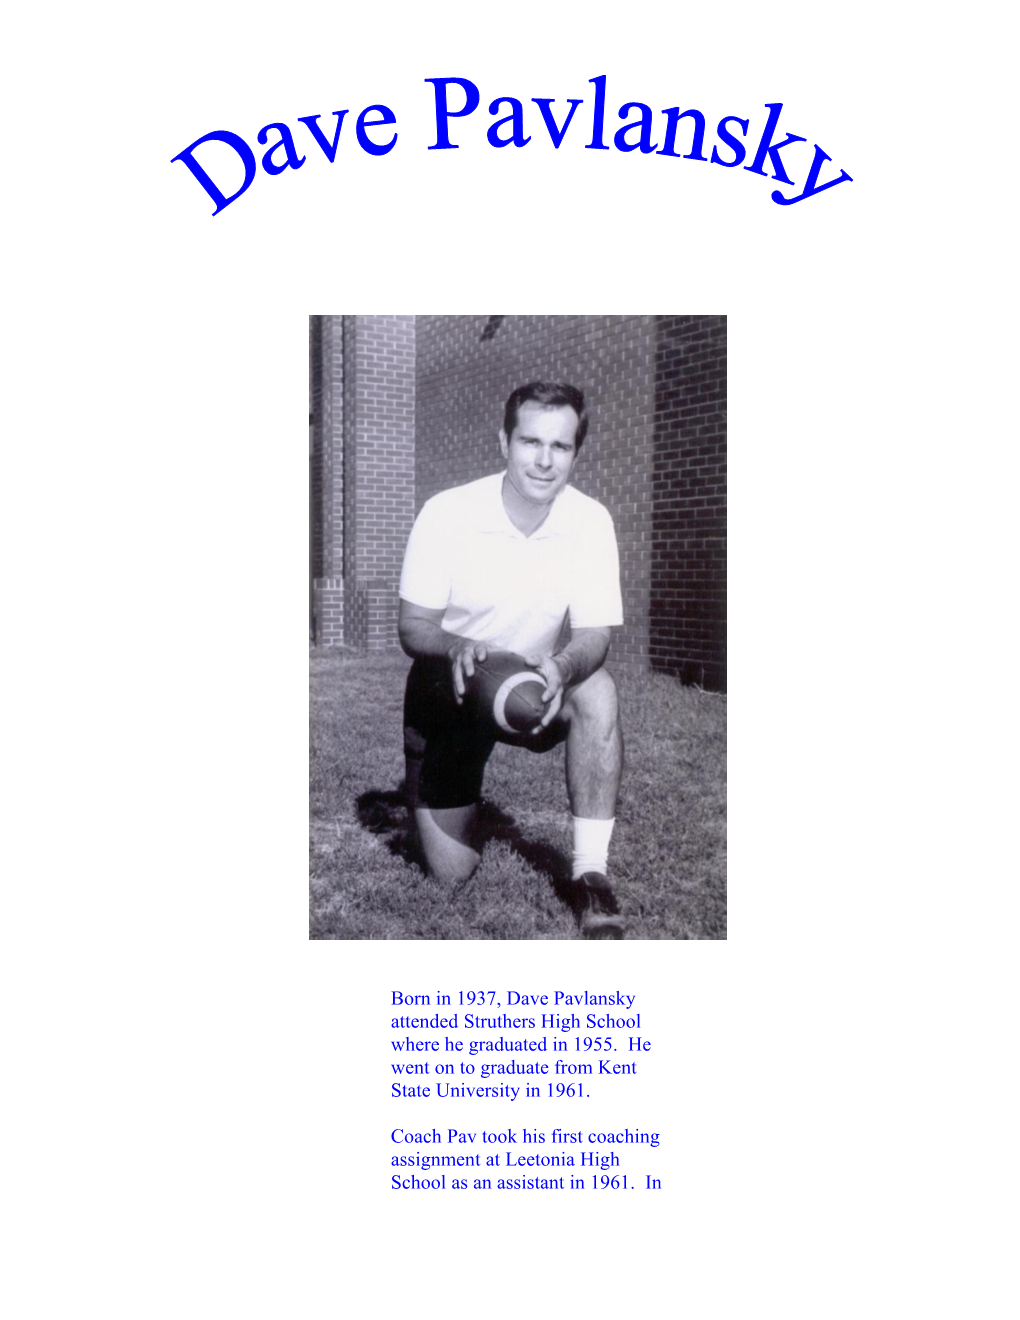 Born in 1937, Dave Pavlansky Attended Struthers High School Where He Graduated in 1955